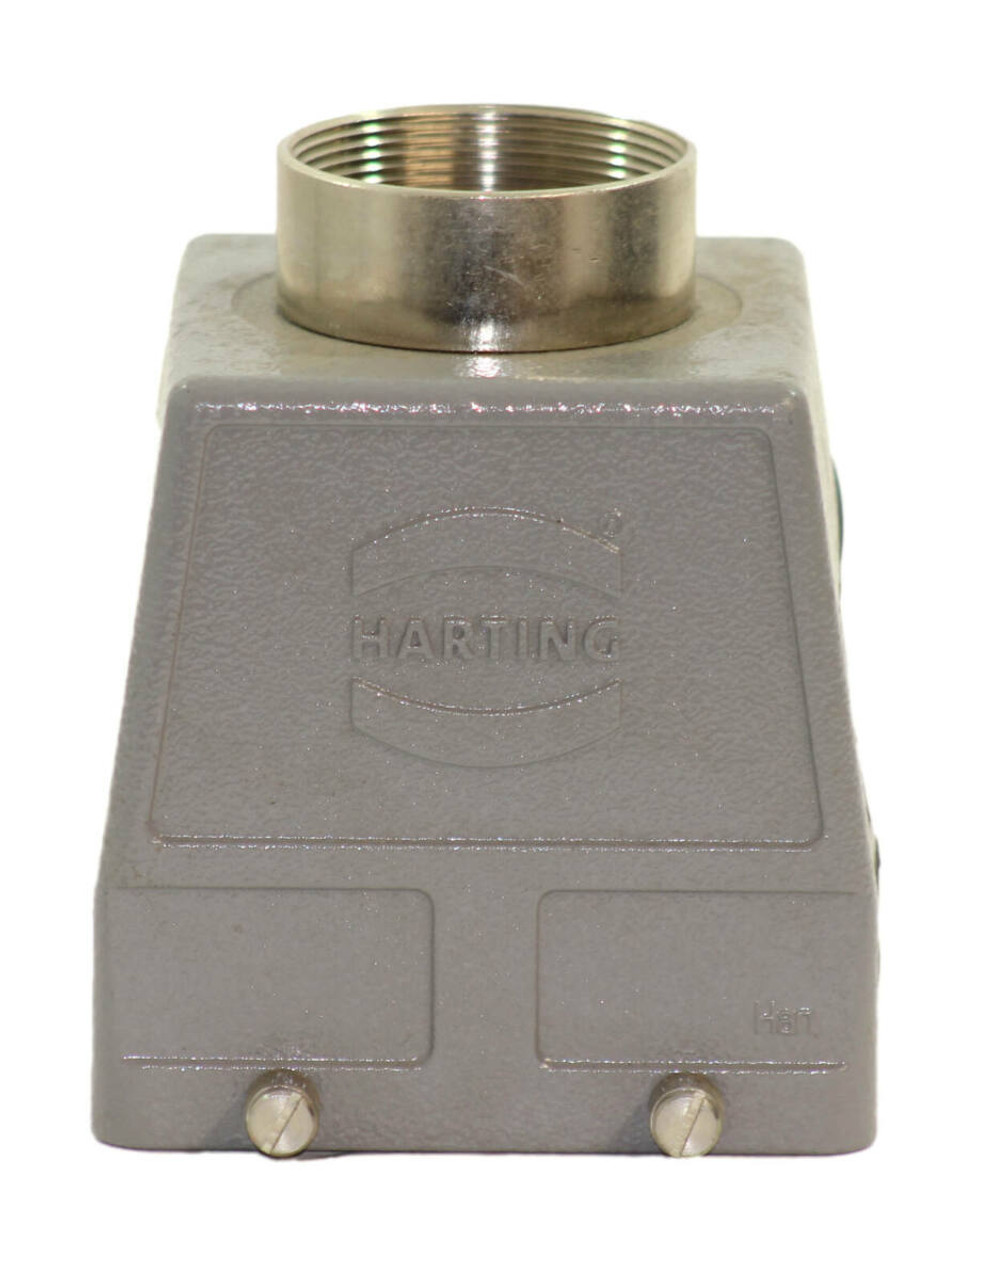 Harting 09300320422 Power Connector Material: Aluminum Color: Gray Heavy Duty